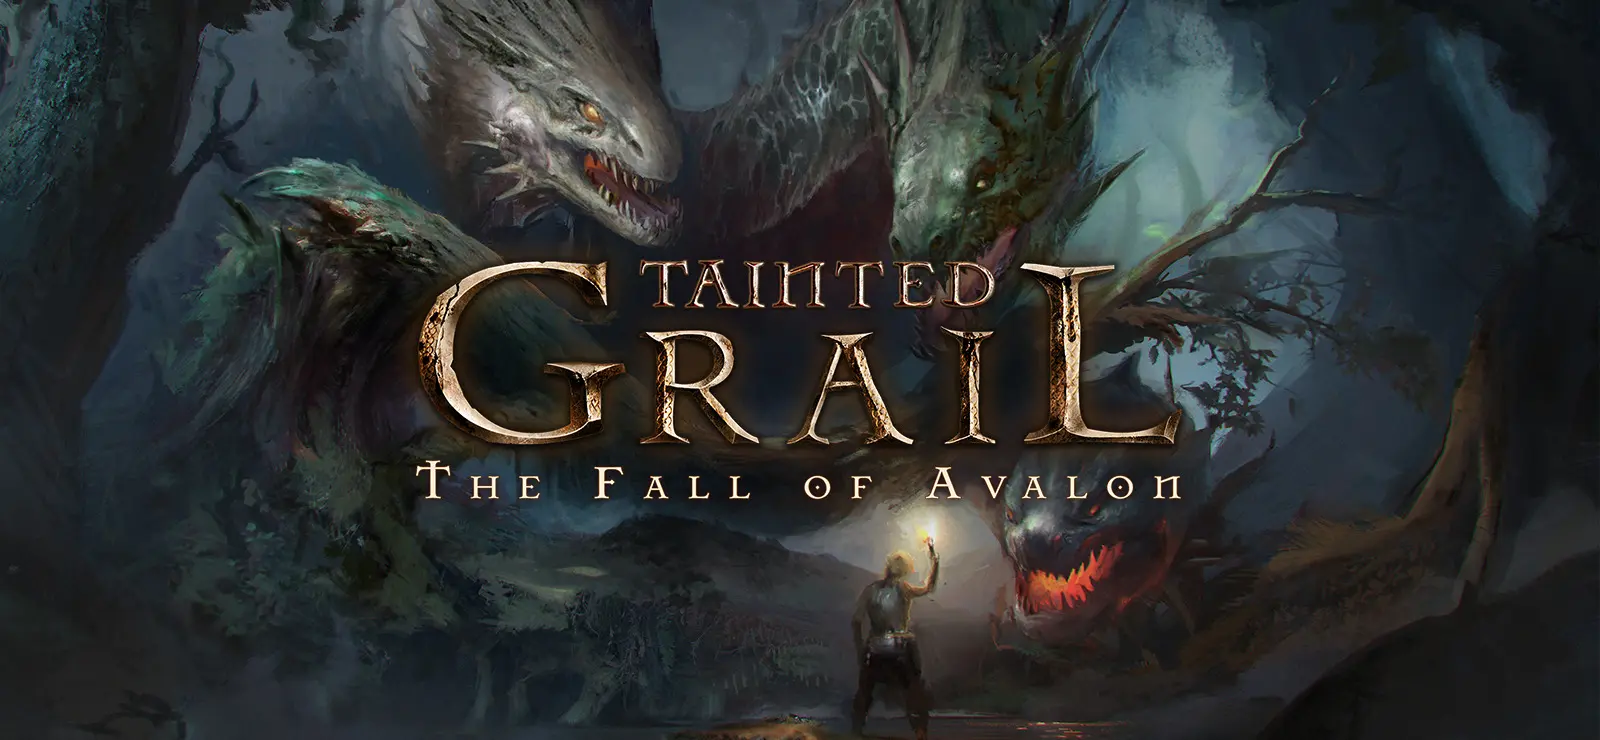 Tainted Grail The Fall of Avalon review